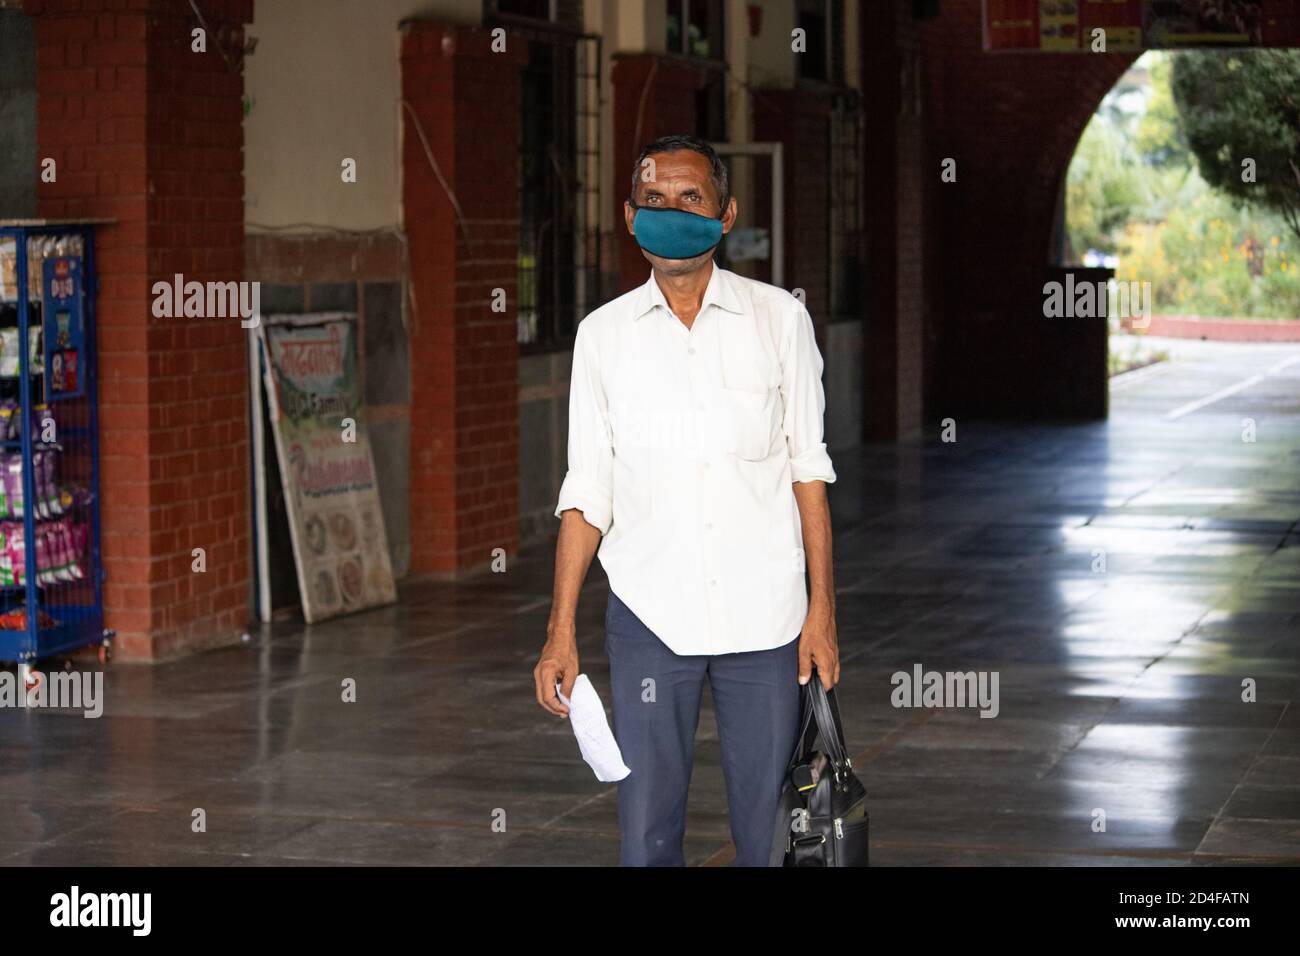 Dehradun, Uttarakhand/India-September 12 2020:A Bus conductor wearing face mask at the bus station, waiting for passengers. Stock Photo